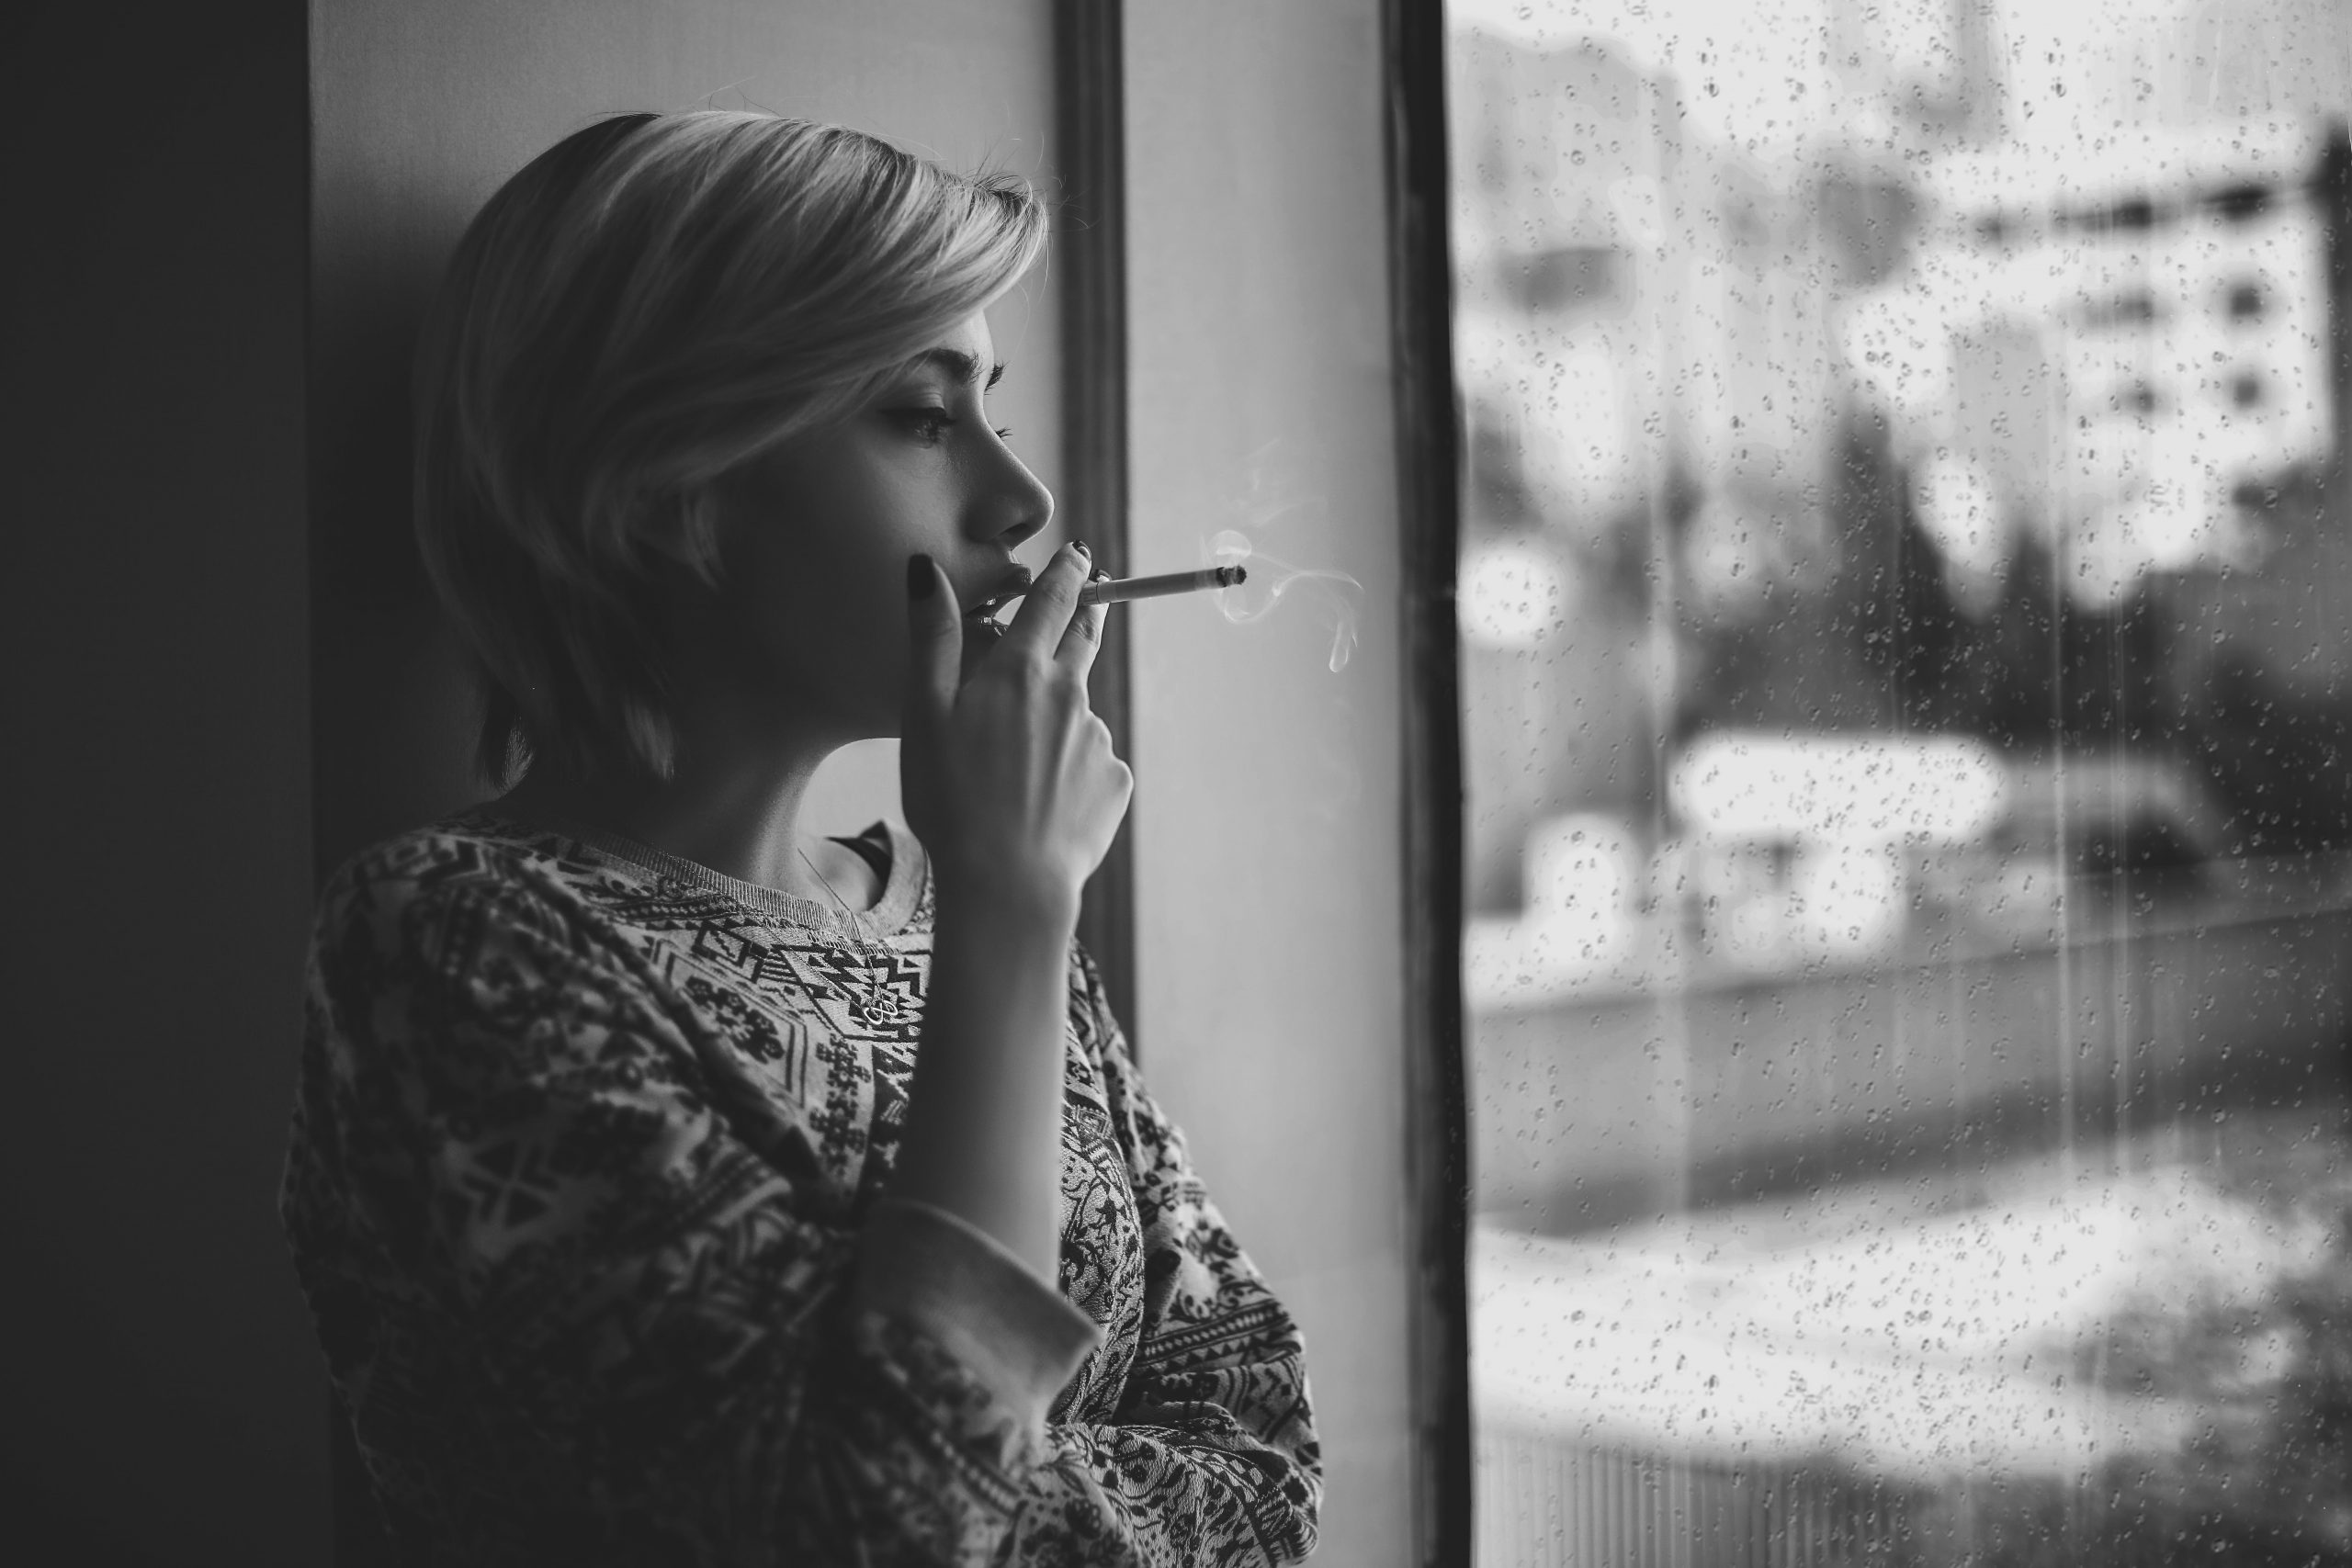 A girl is standing by the window smoking a cigarette